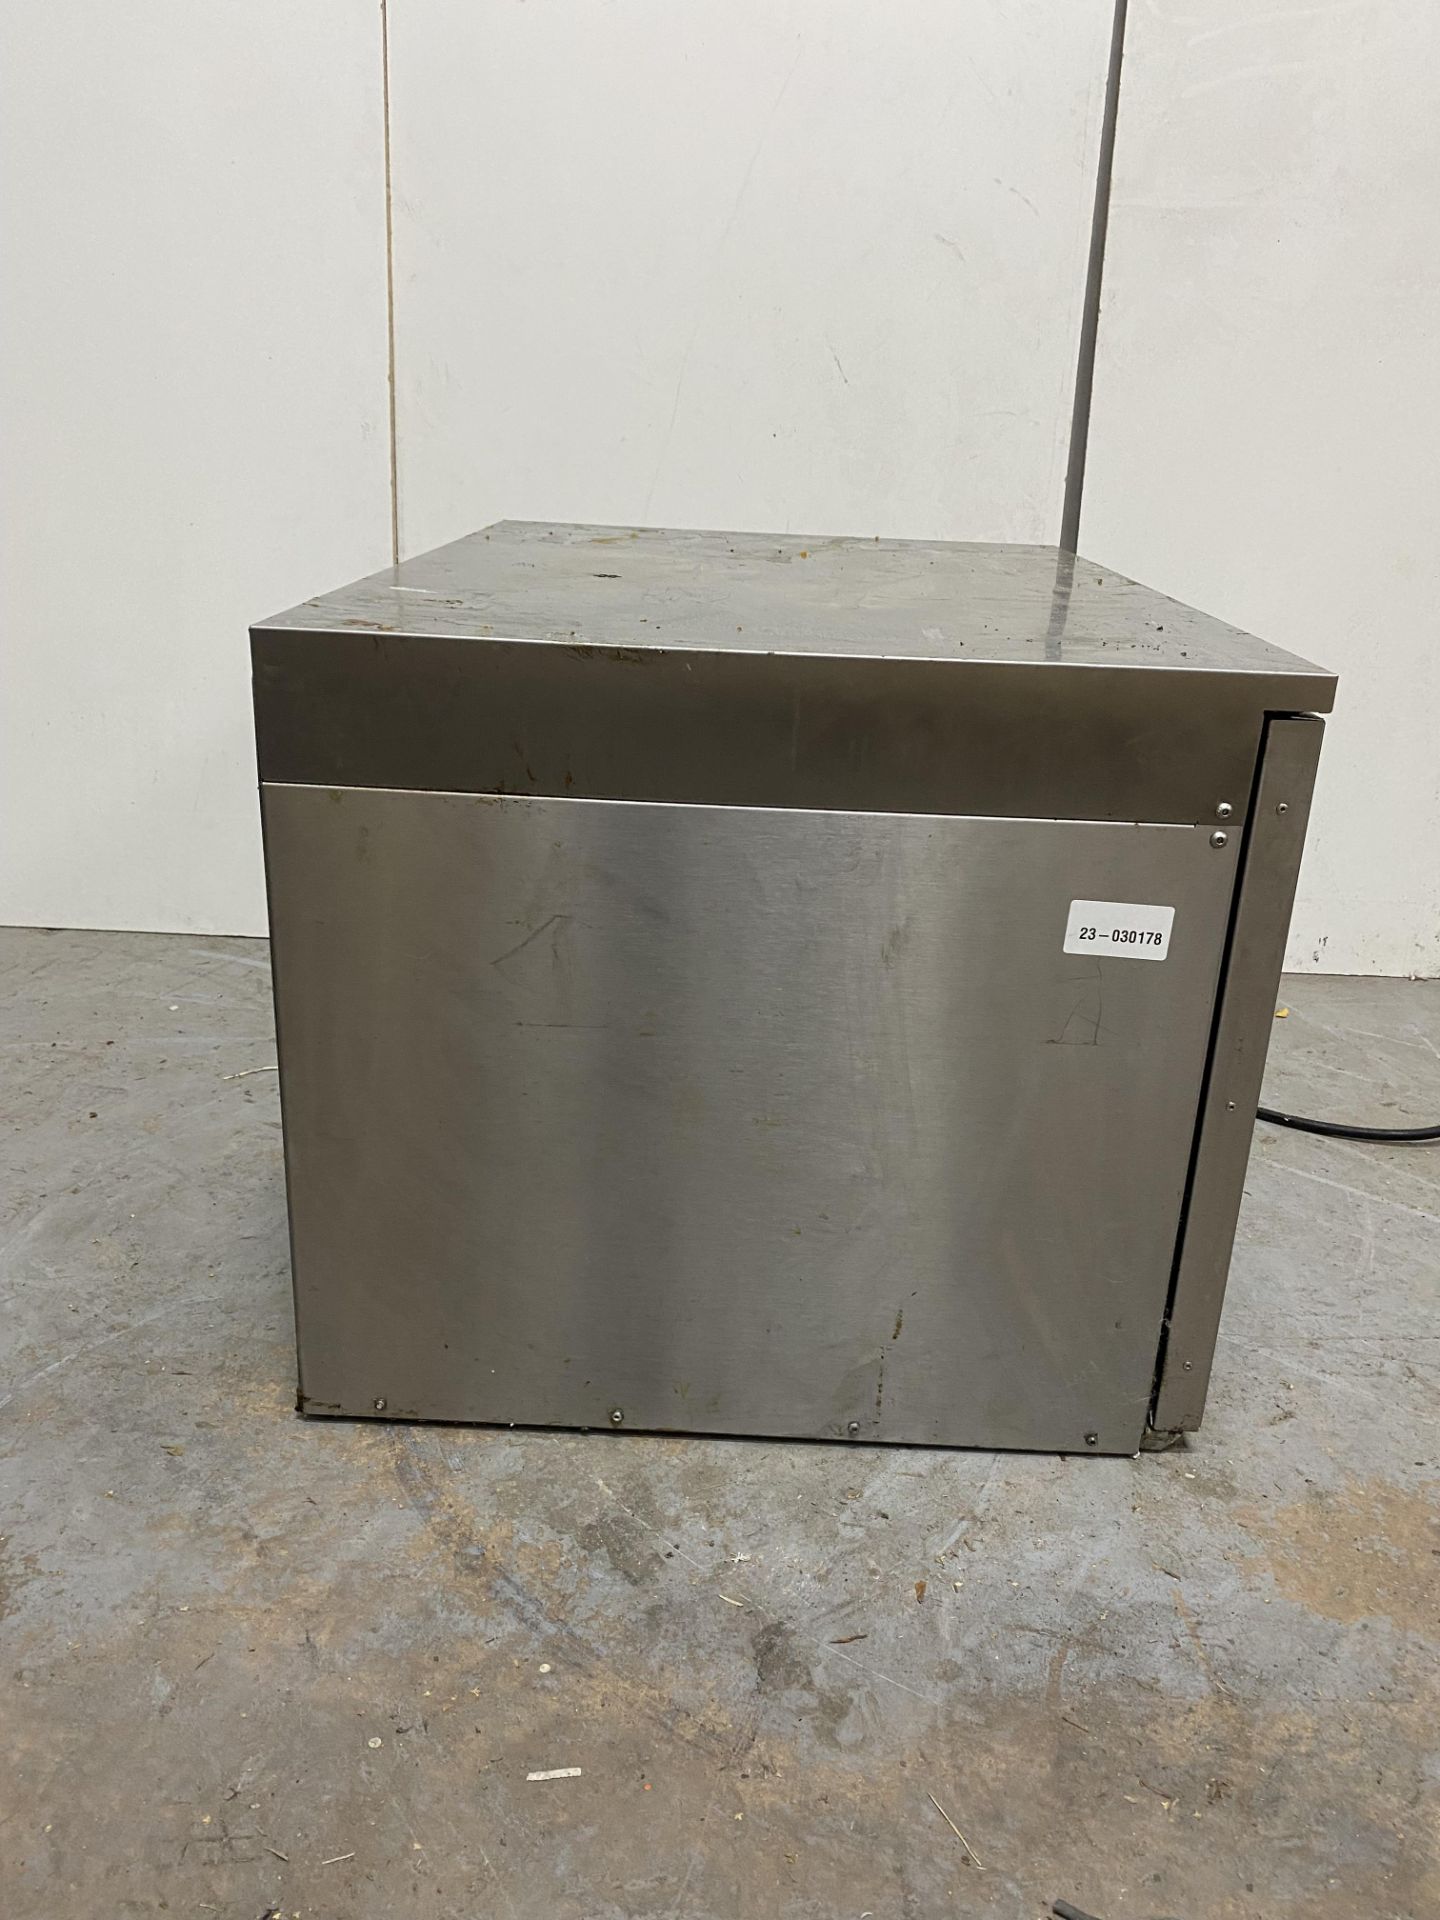 Buffalo NBCO100 Large Commercial Convection Oven - Image 6 of 8